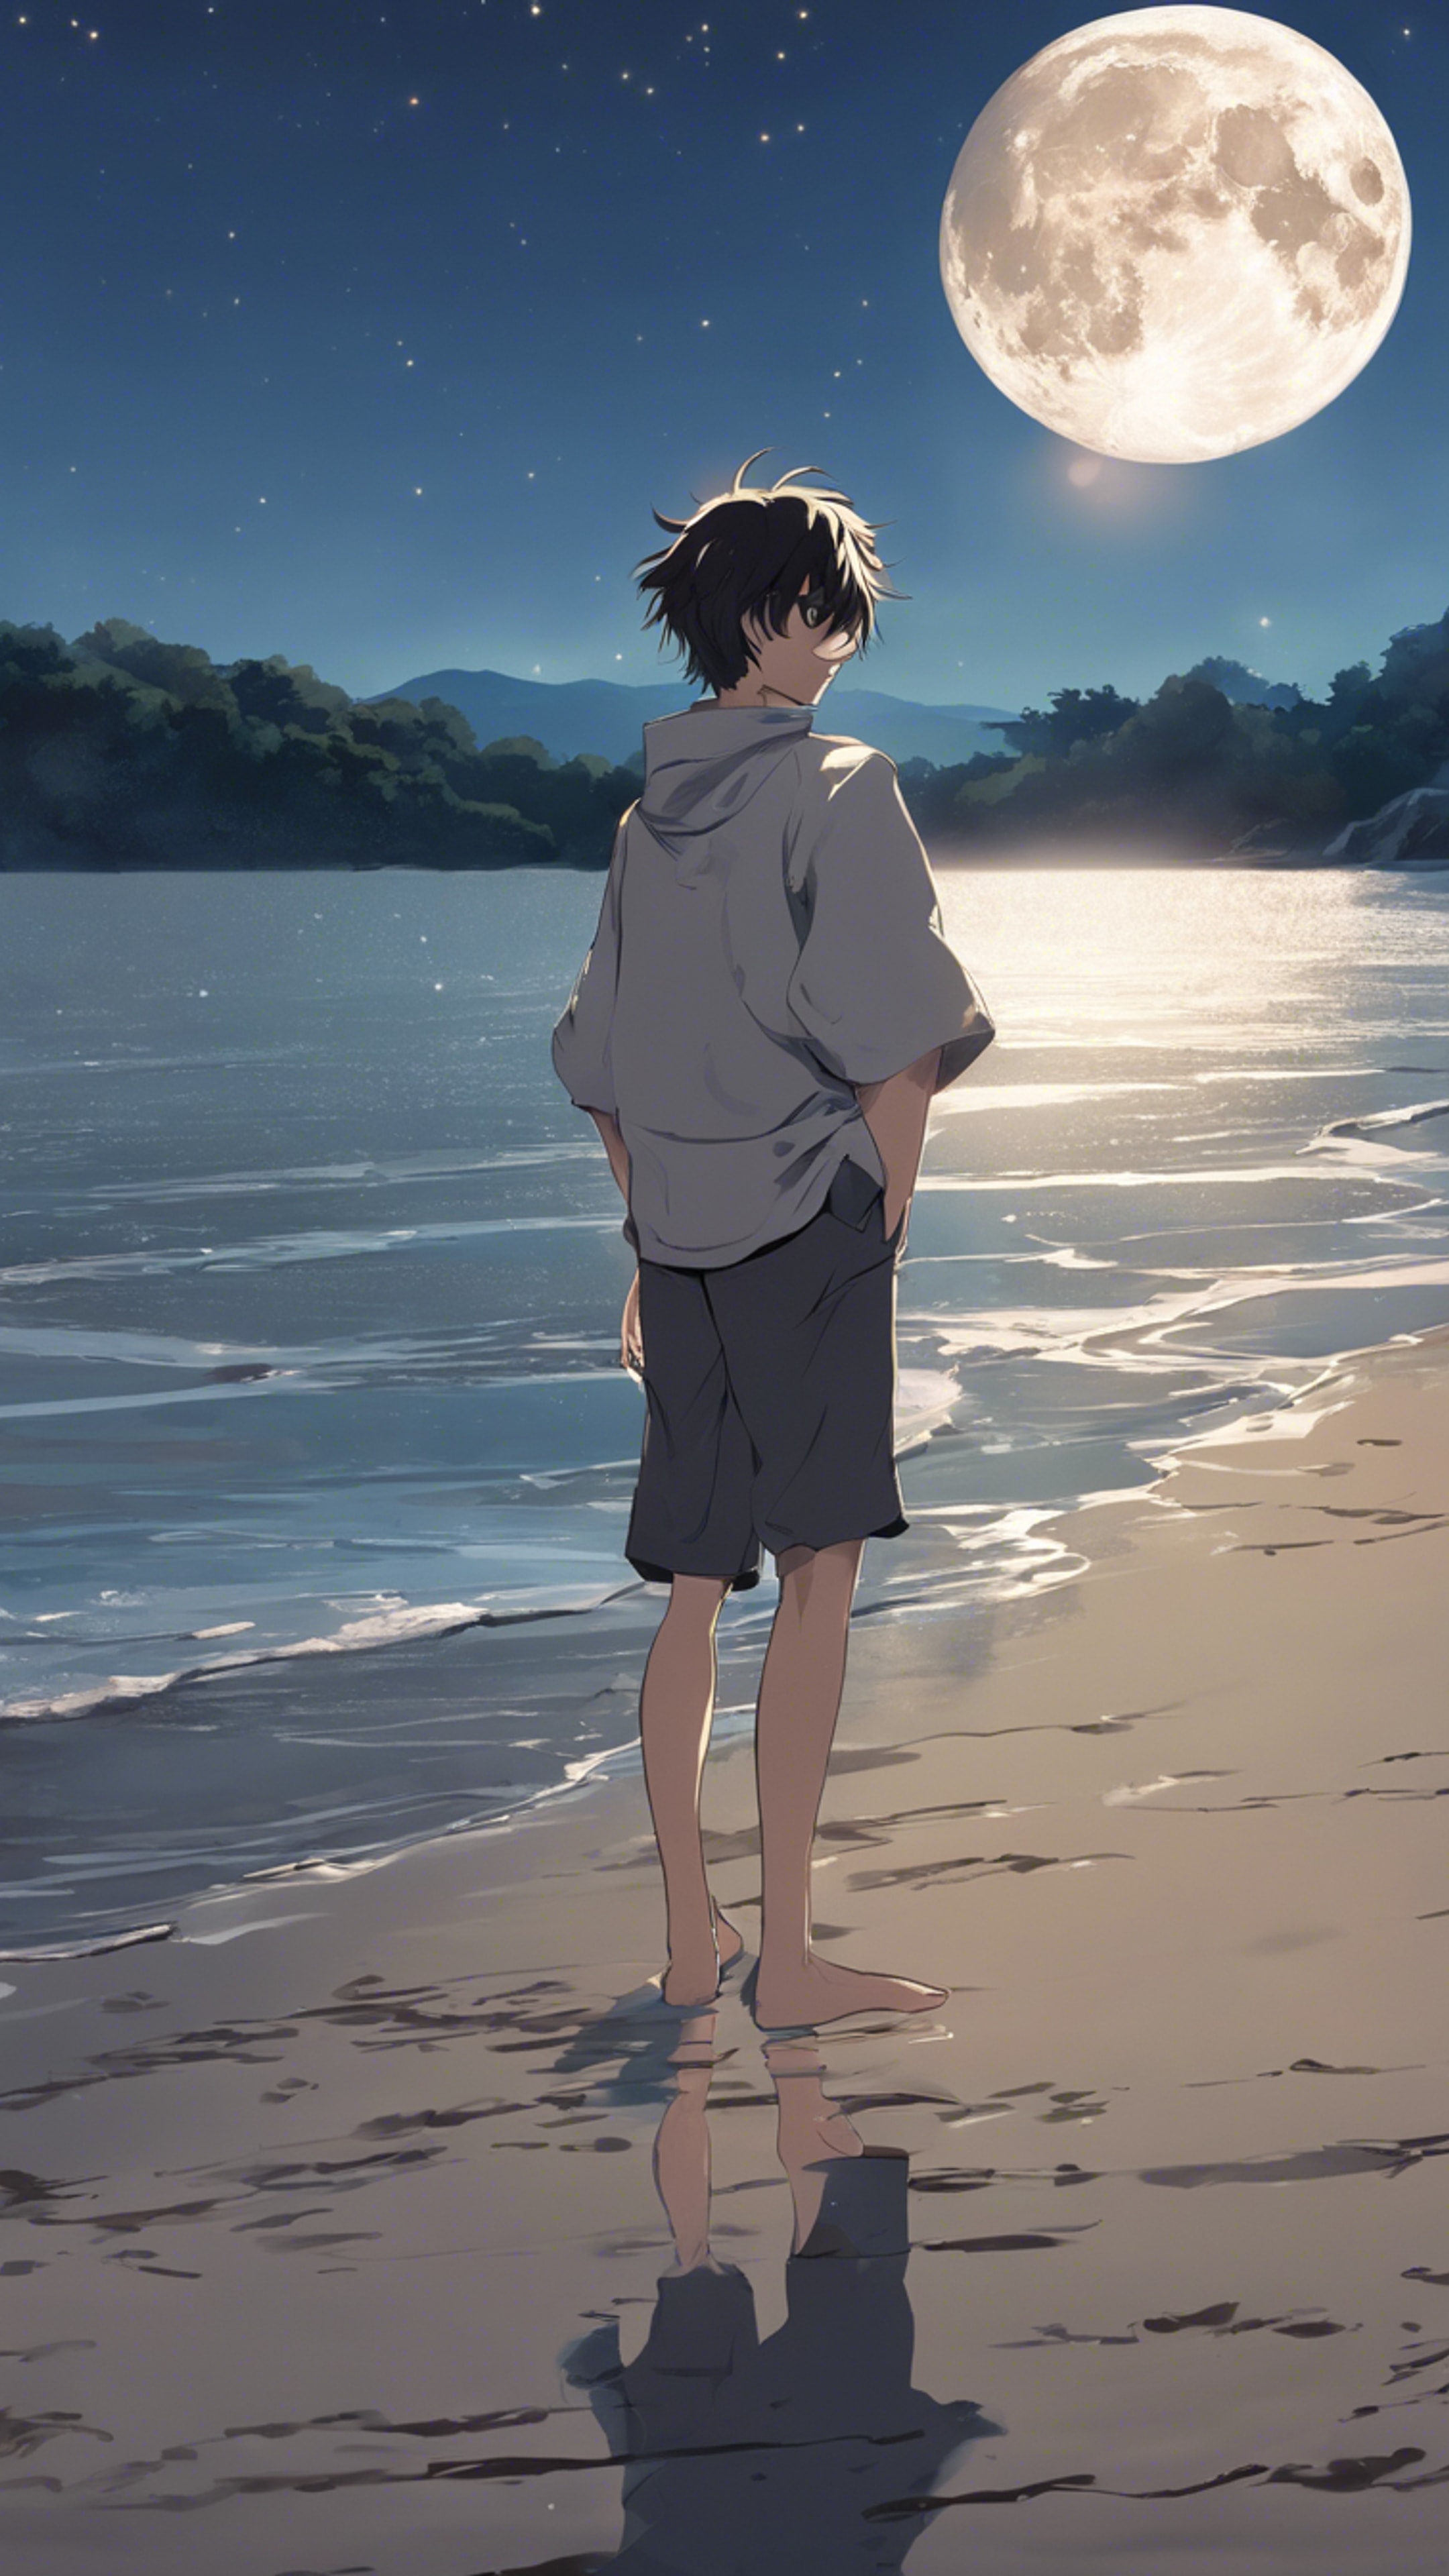 An anime boy standing barefoot on the shore, with the moon reflecting in upturned, joyous eyes. Дэлгэцийн зураг[a80f9c3e465041ad9759]